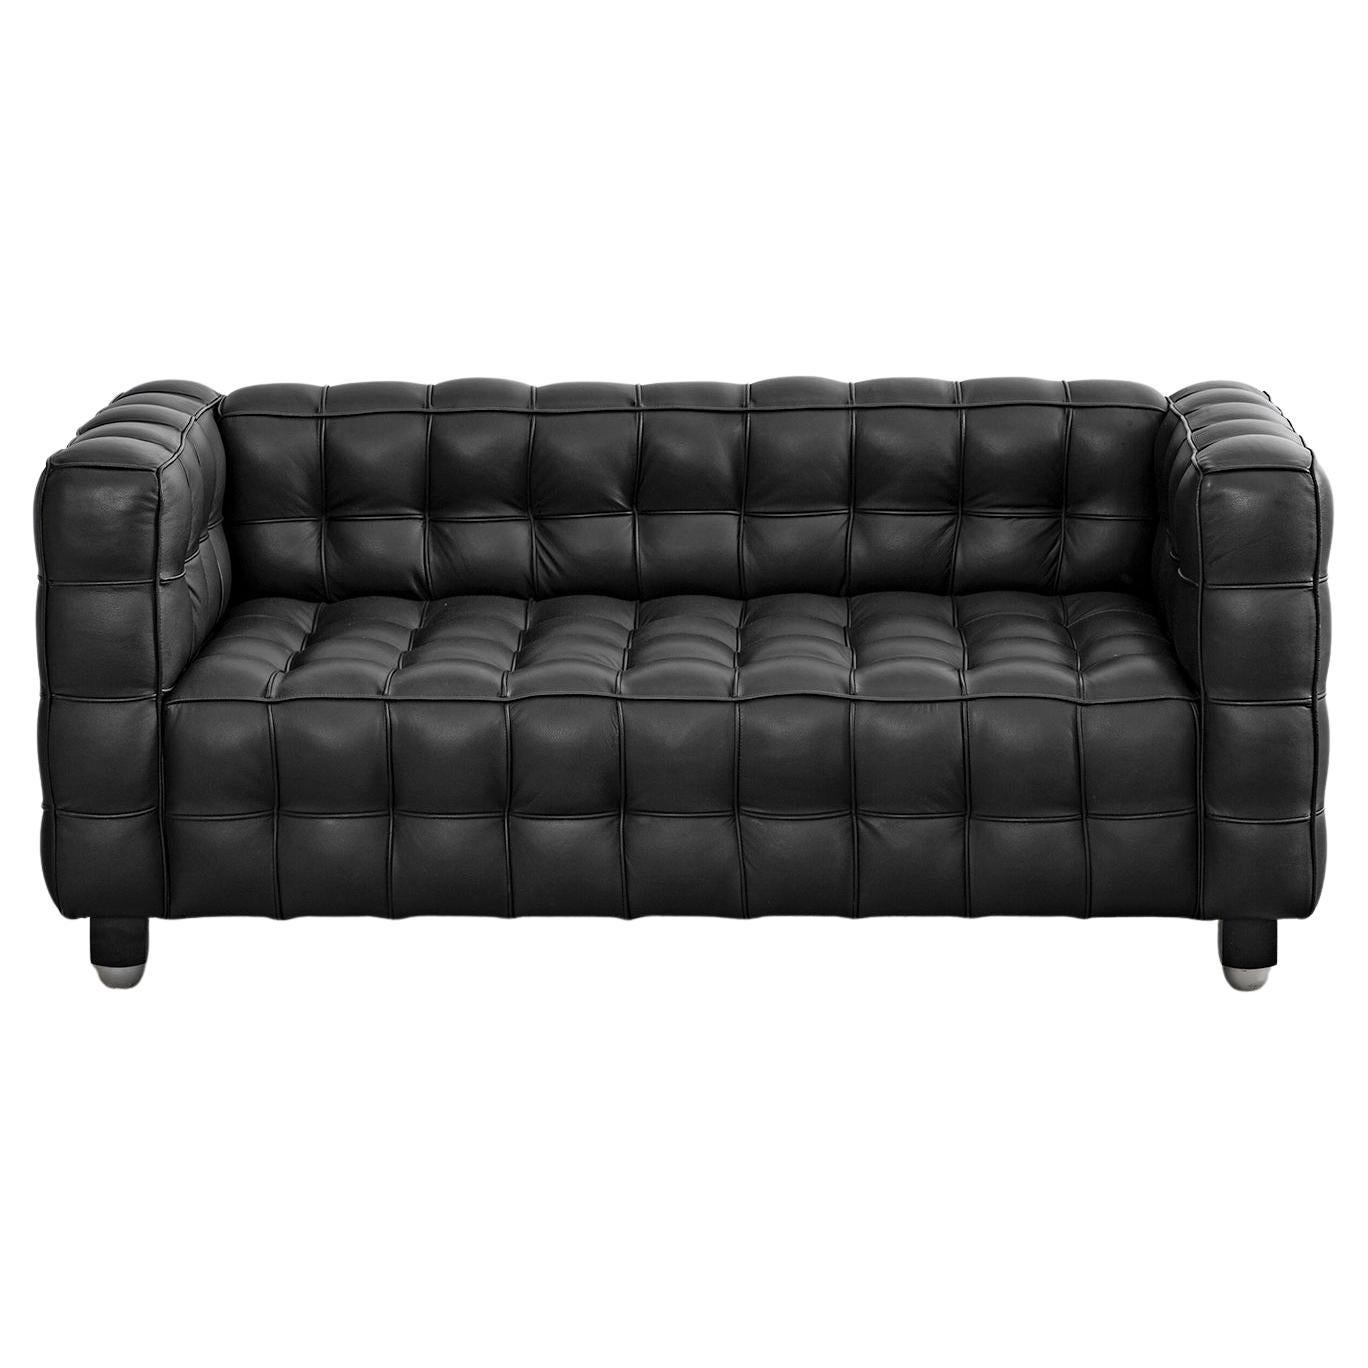 Josef Hoffman Attributed Black Leather Sofa Settee For Sale